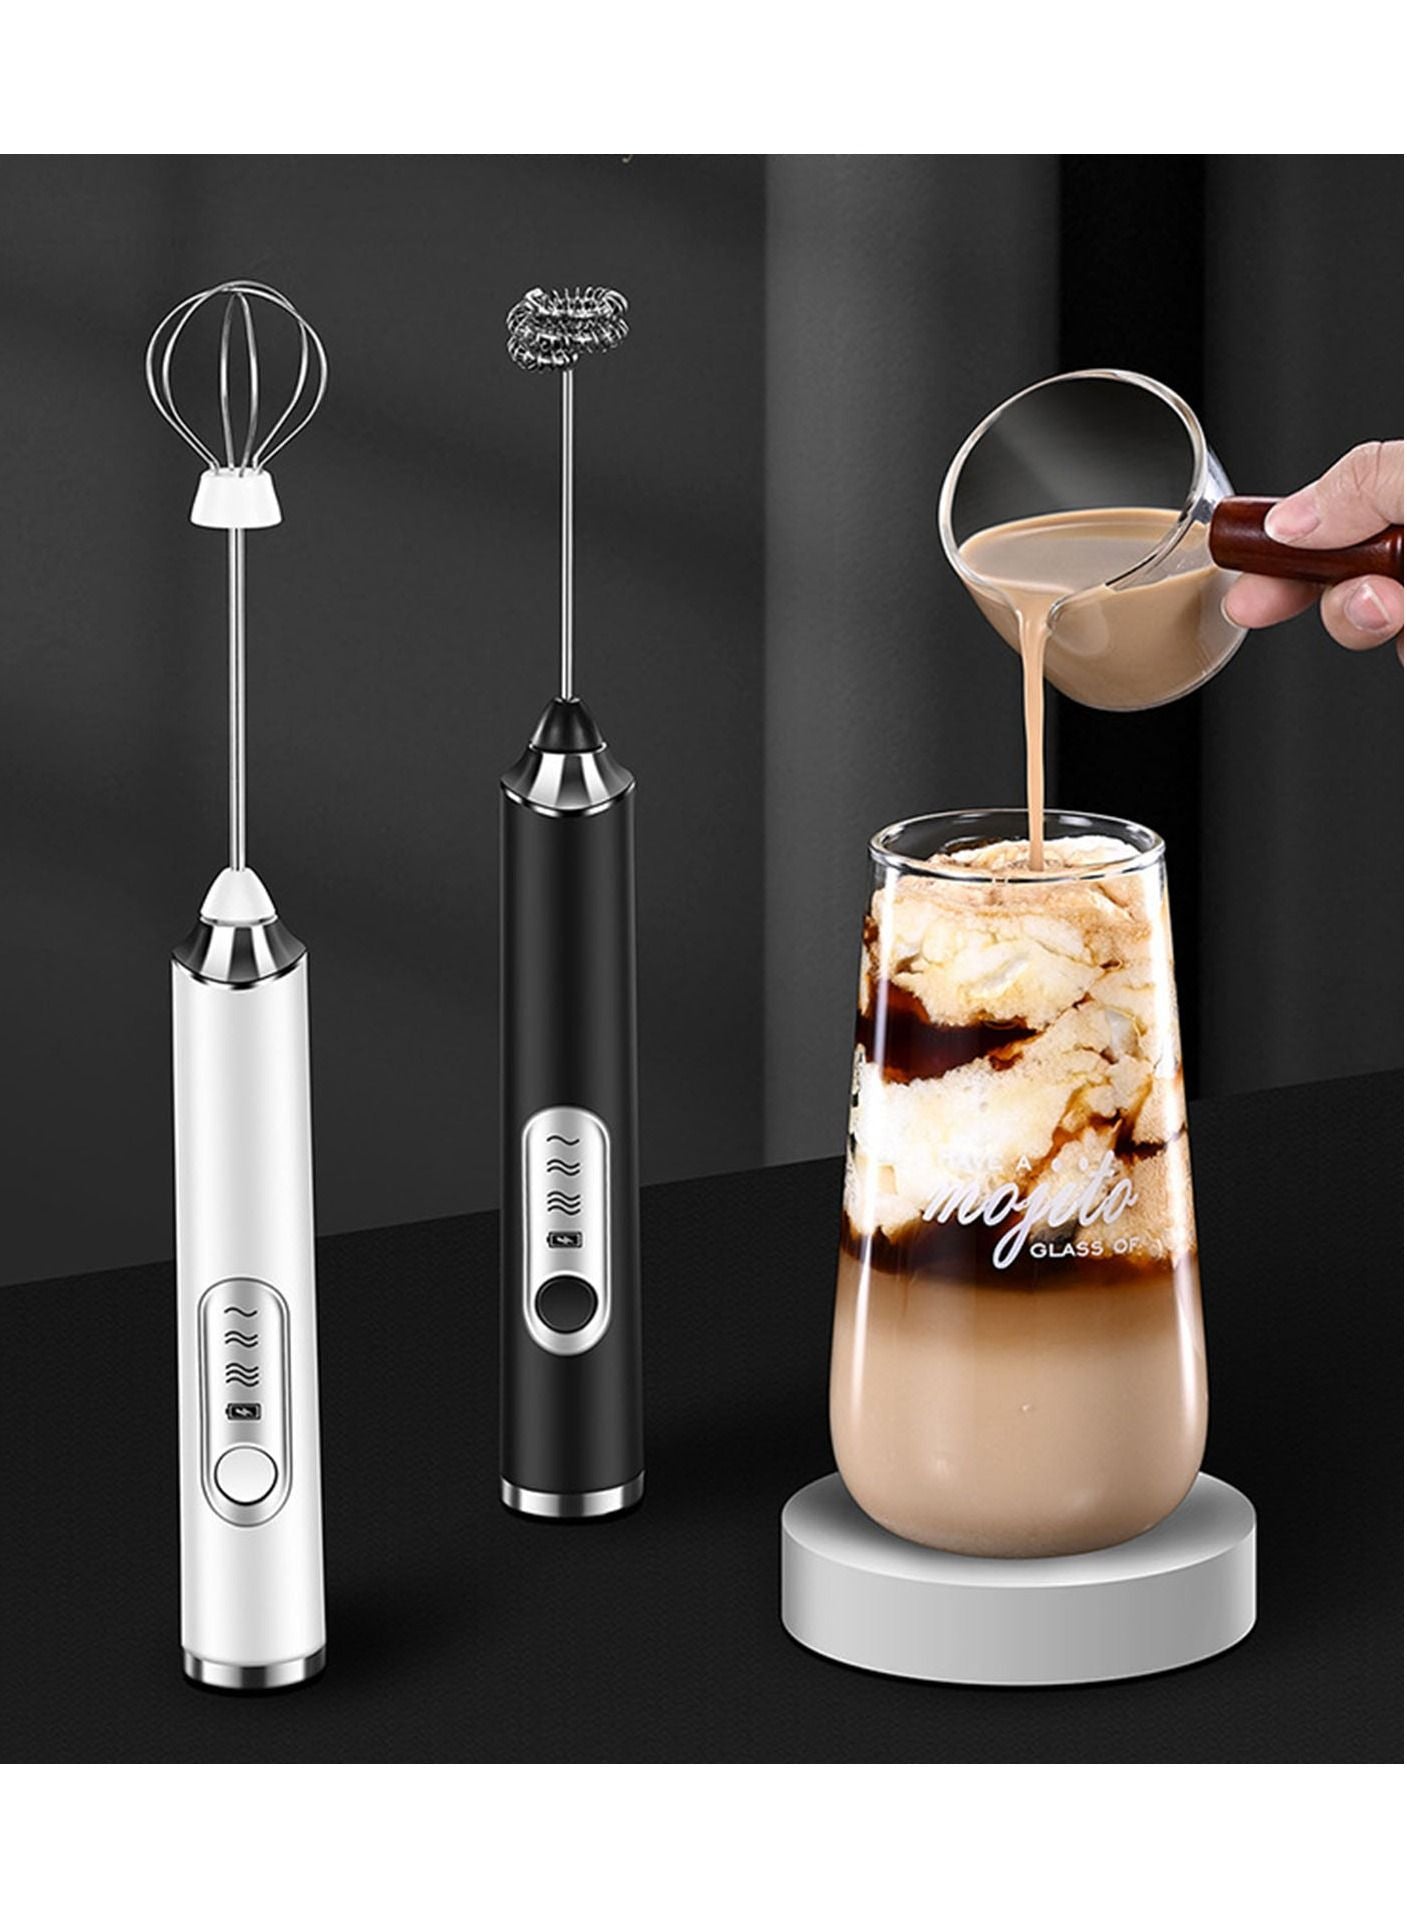 Electric Milk Frother Handheld Electric Whisk Coffee Frother Egg Beater Milk Cappuccino Latte Frother Drink Mixer Kitchen Tools Black